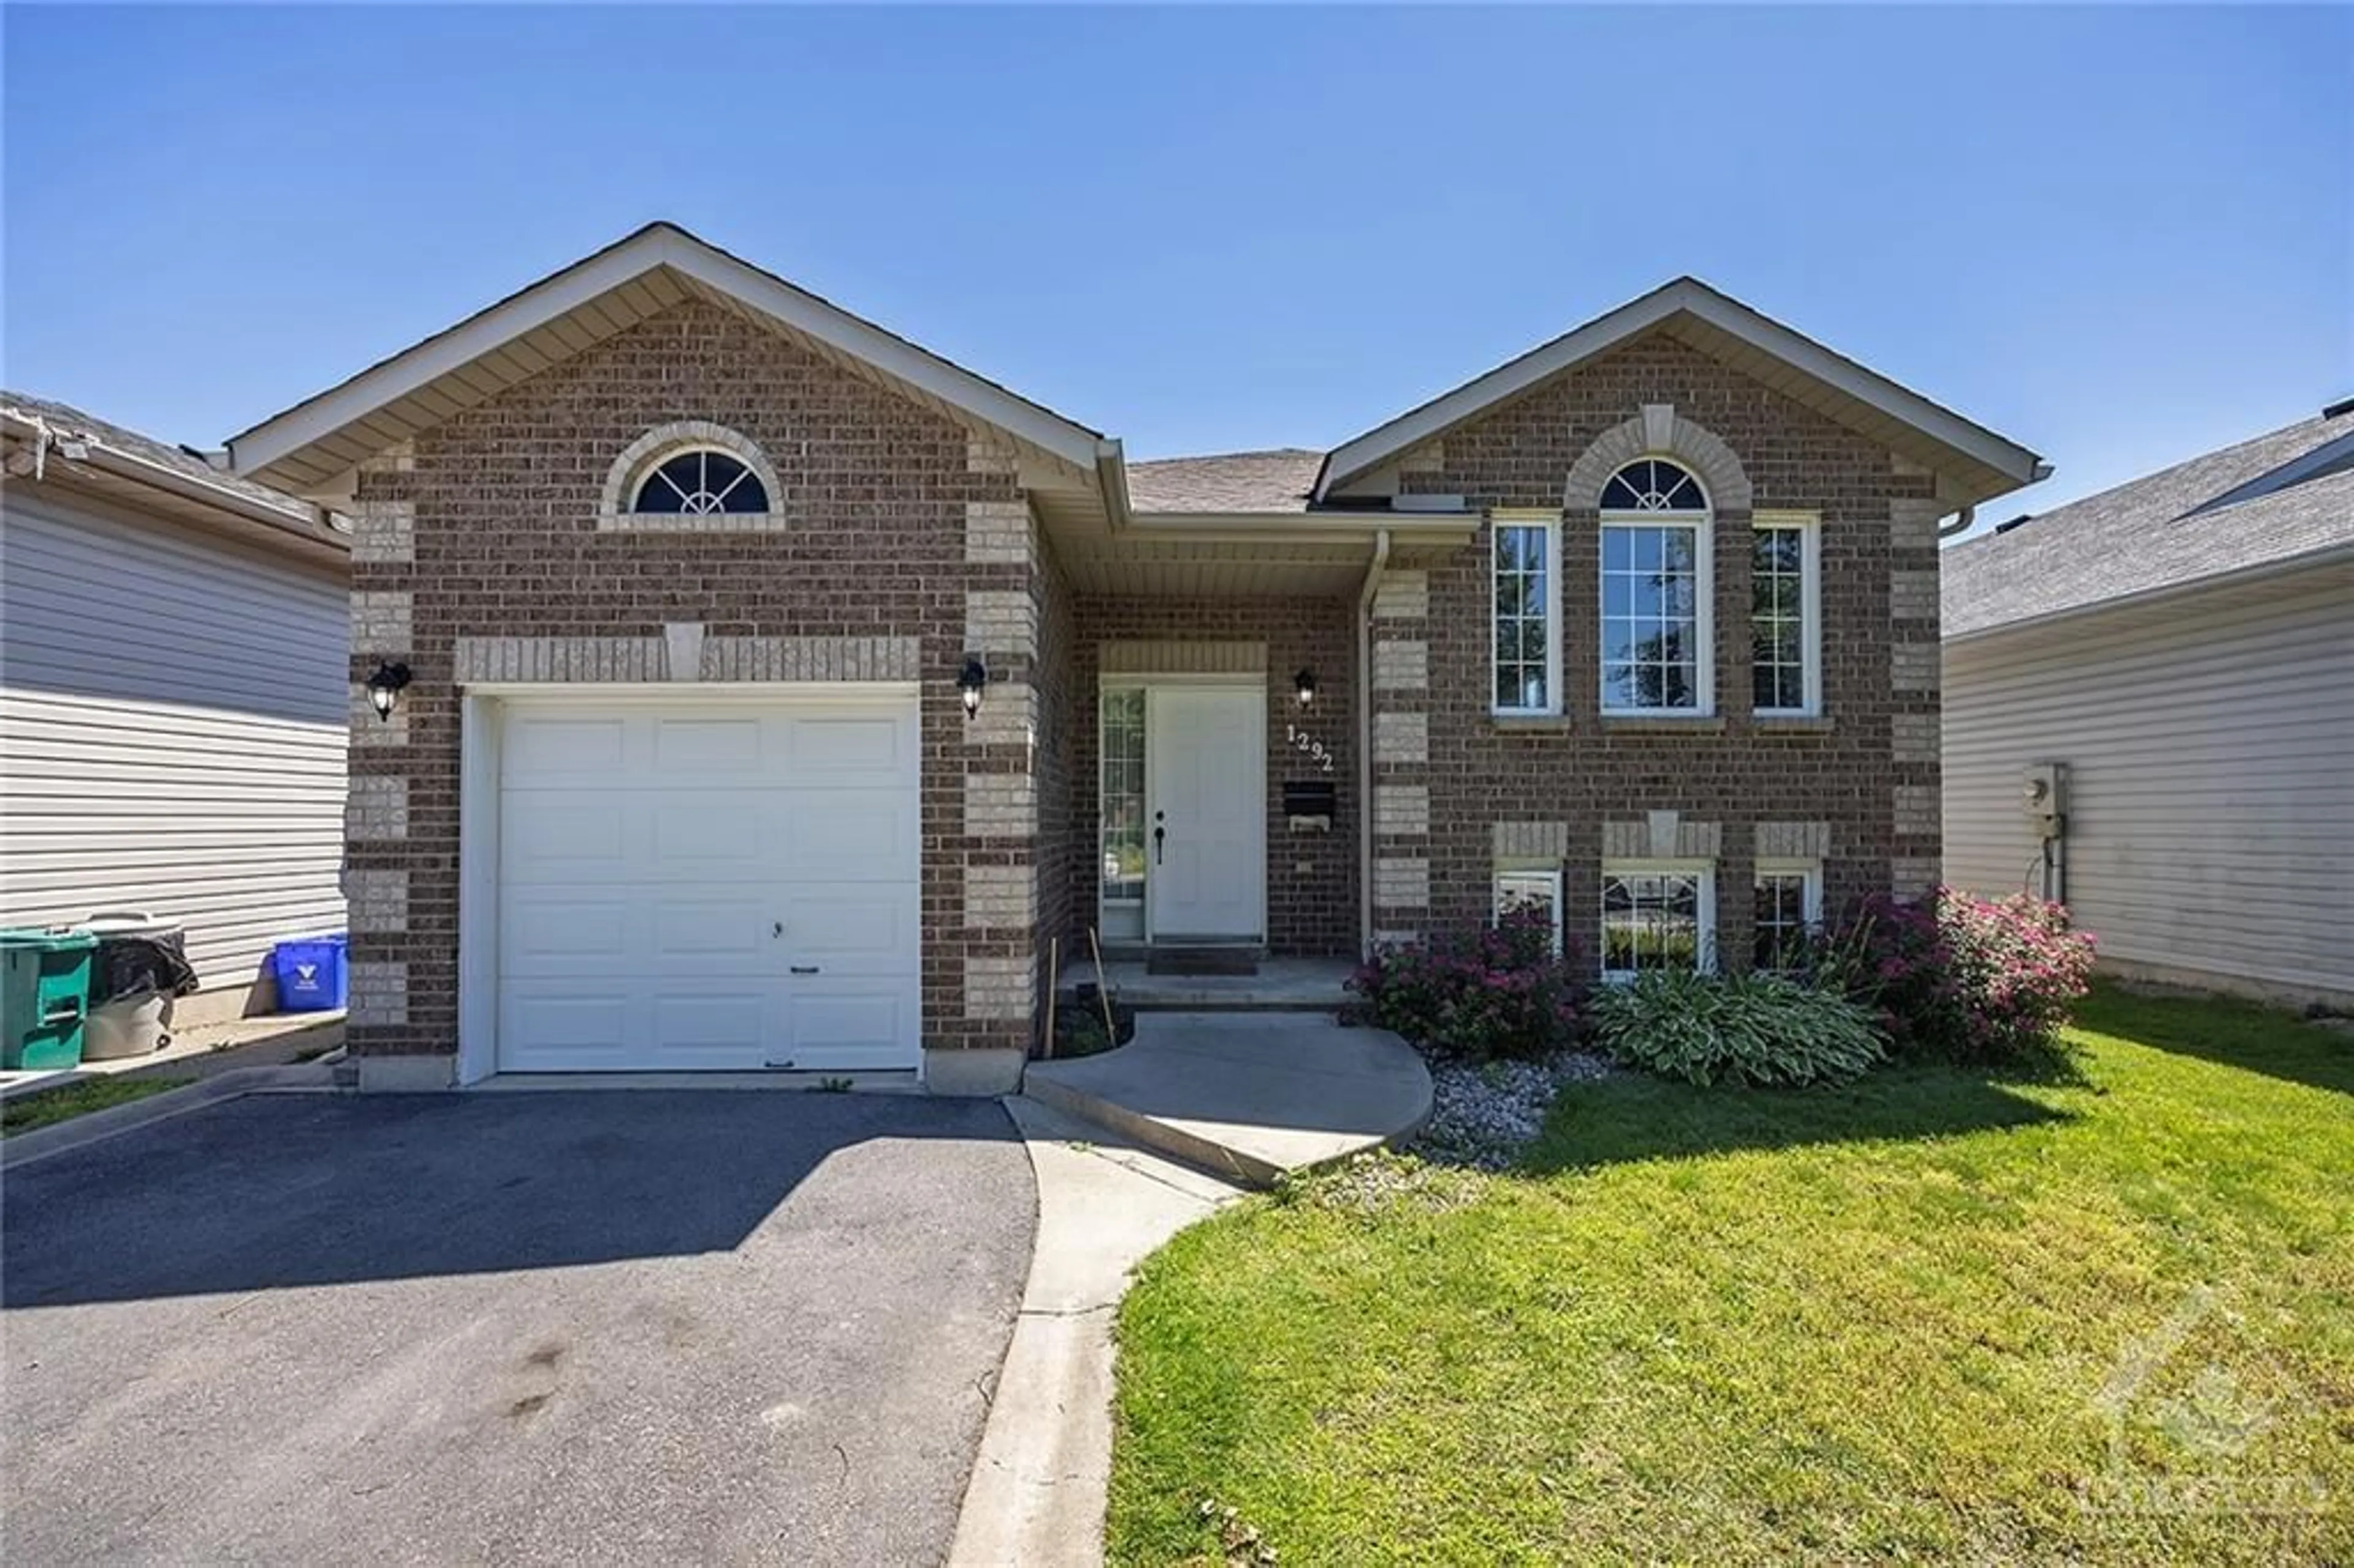 Home with brick exterior material for 1292 JUNIPER Dr, Kingston Ontario K7P 3G4